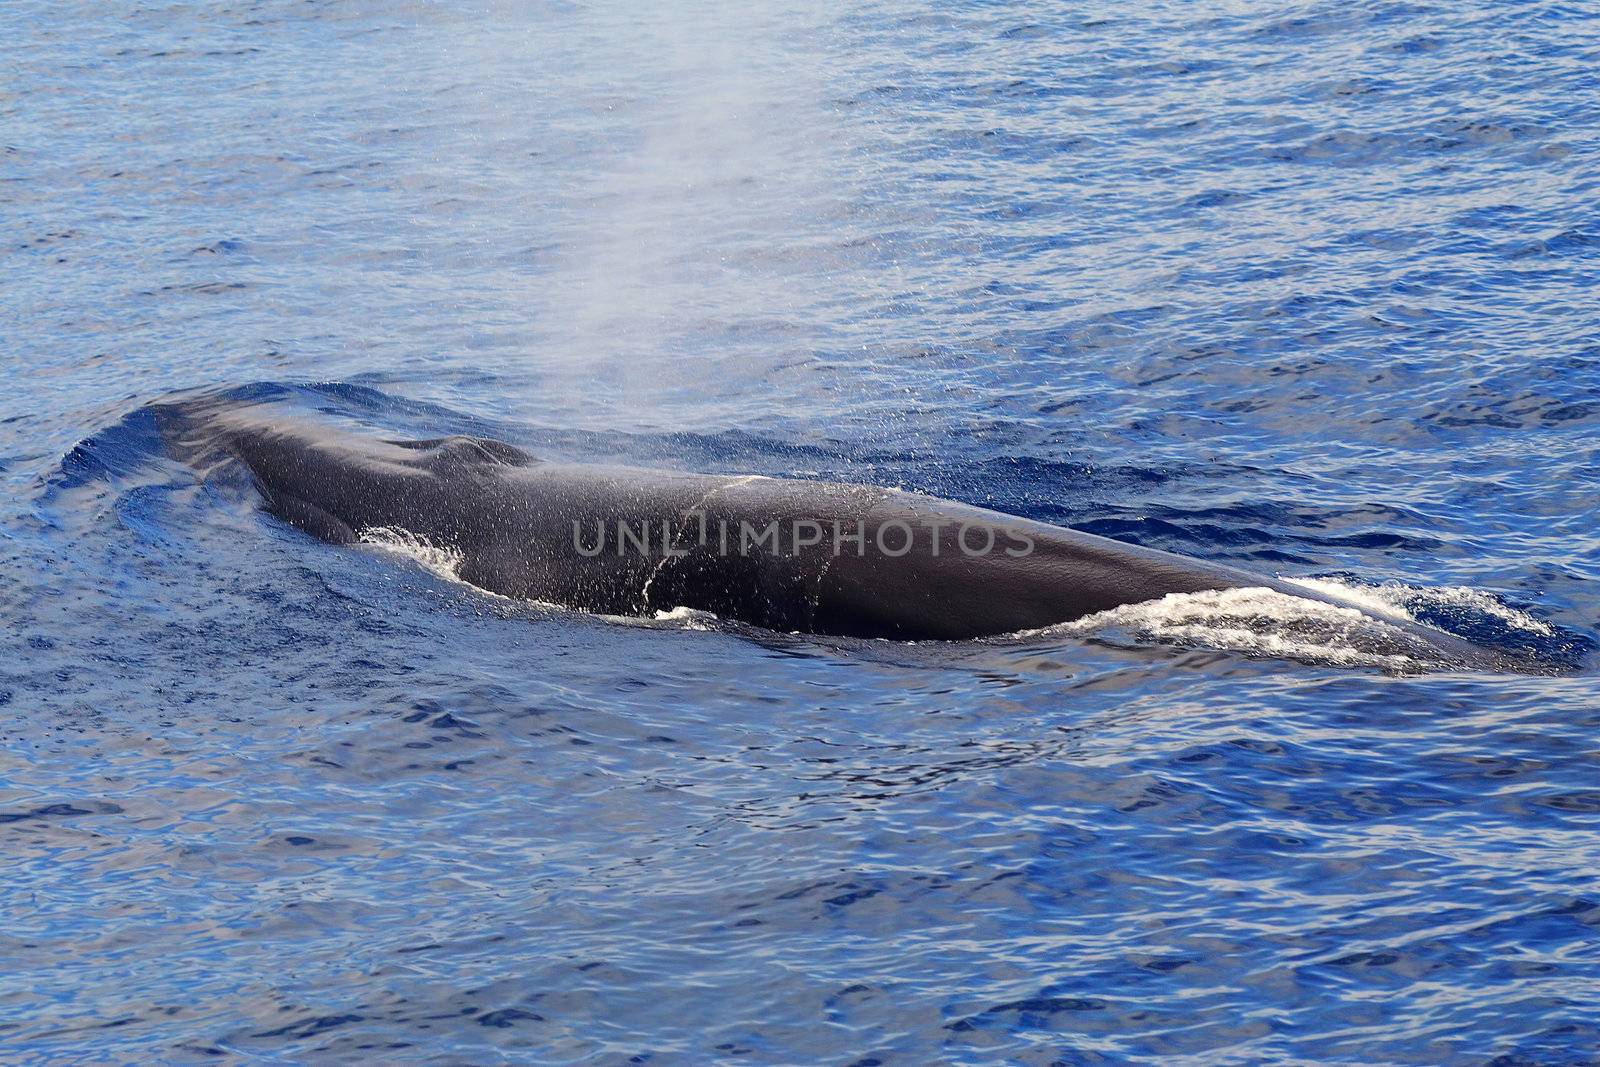 A surfacing Fin Whale ( Balaenoptera physalus) the second largest Animal on the planet after the Blue whale